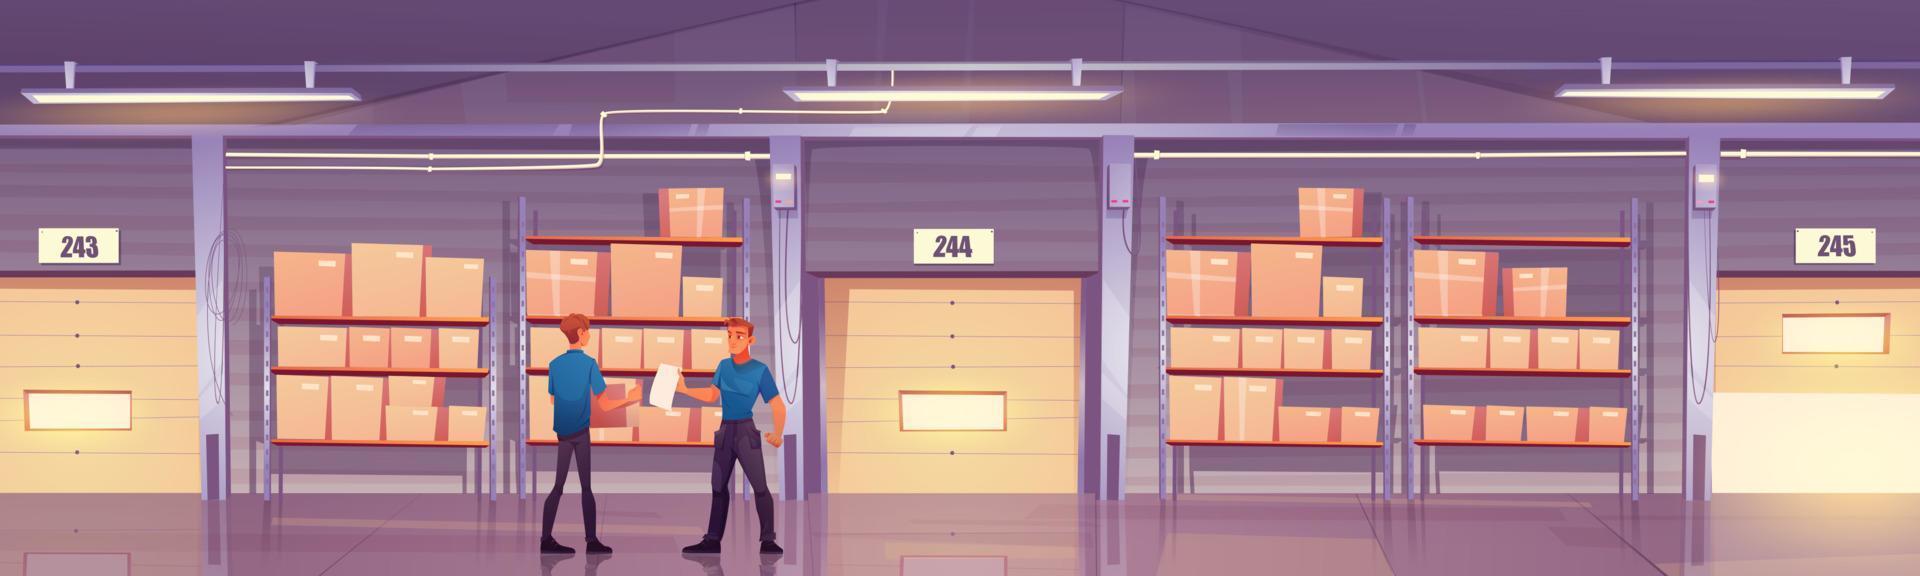 Warehouse with workers, boxes and closed gates vector